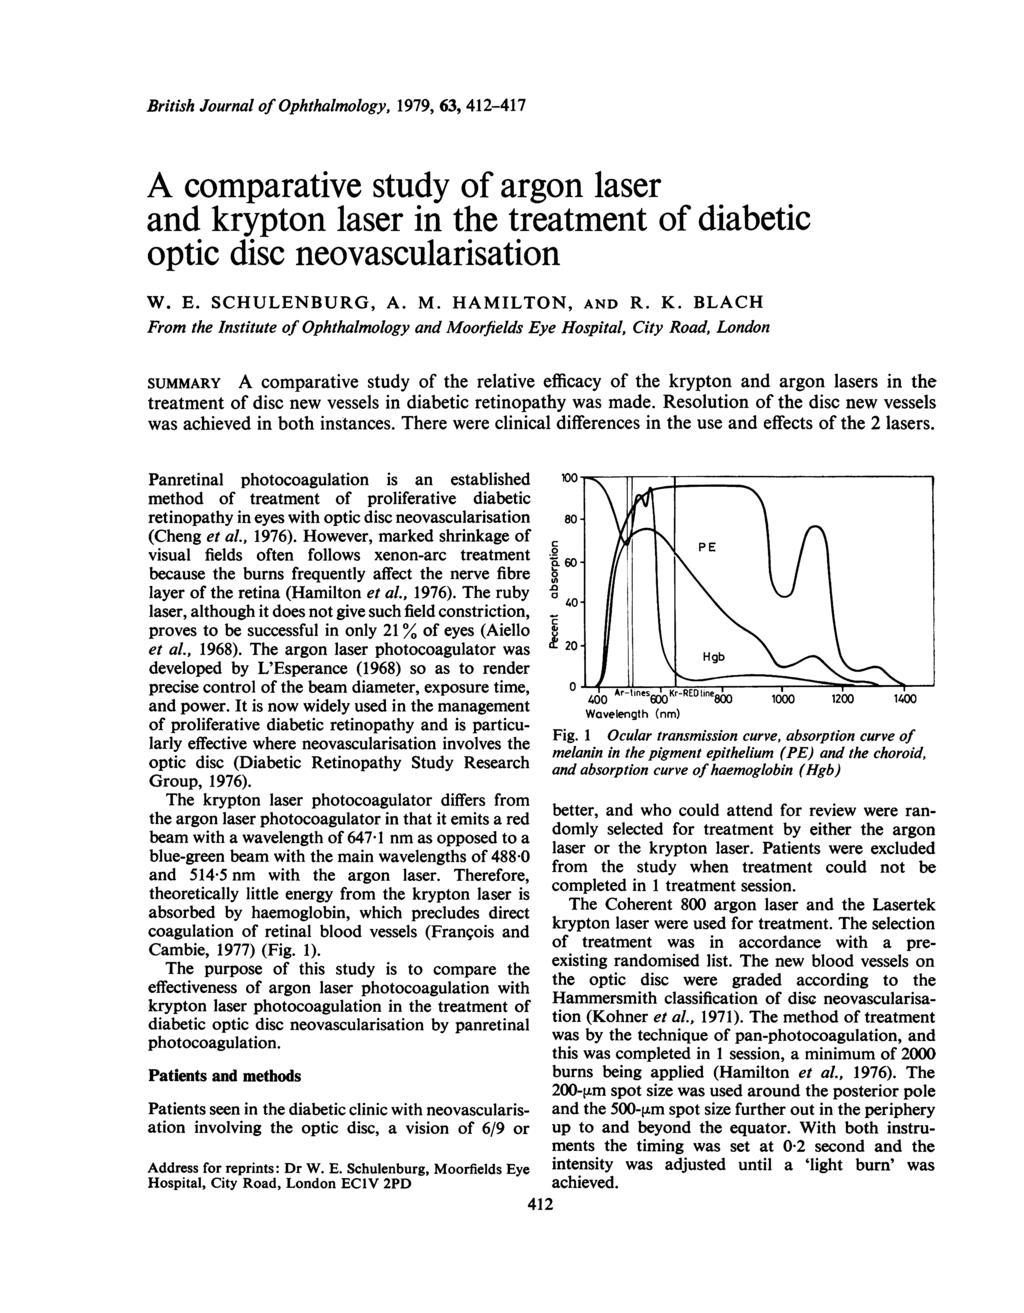 British Journal of Ophthalmology, 1979, 63, 412-417 A comparative study of argon laser and krypton laser in the treatment of diabetic optic disc neovascularisation W. E. SCHULENBURG, A. M.